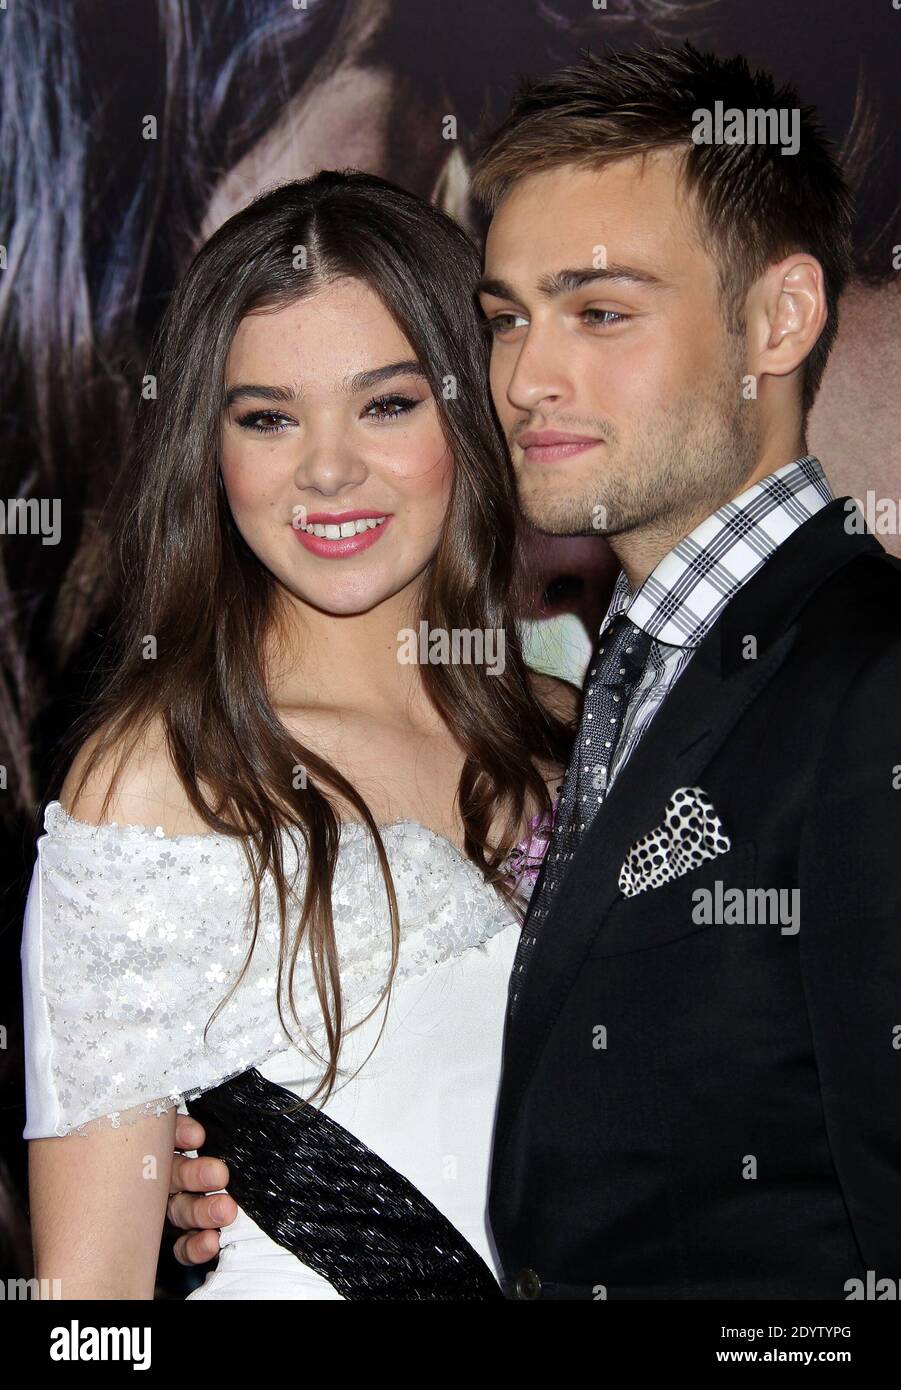 Hailee Steinfeld, Douglas Booth, Relativity's film premiere for Romeo & Juliet at the Arclight Theatre in Hollywood, Los Angeles, CA, USA. September 24, 2013 (Hailee Steinfeld, Douglas Booth) Photo by Baxter/ABACAPRESS.COM Stock Photo